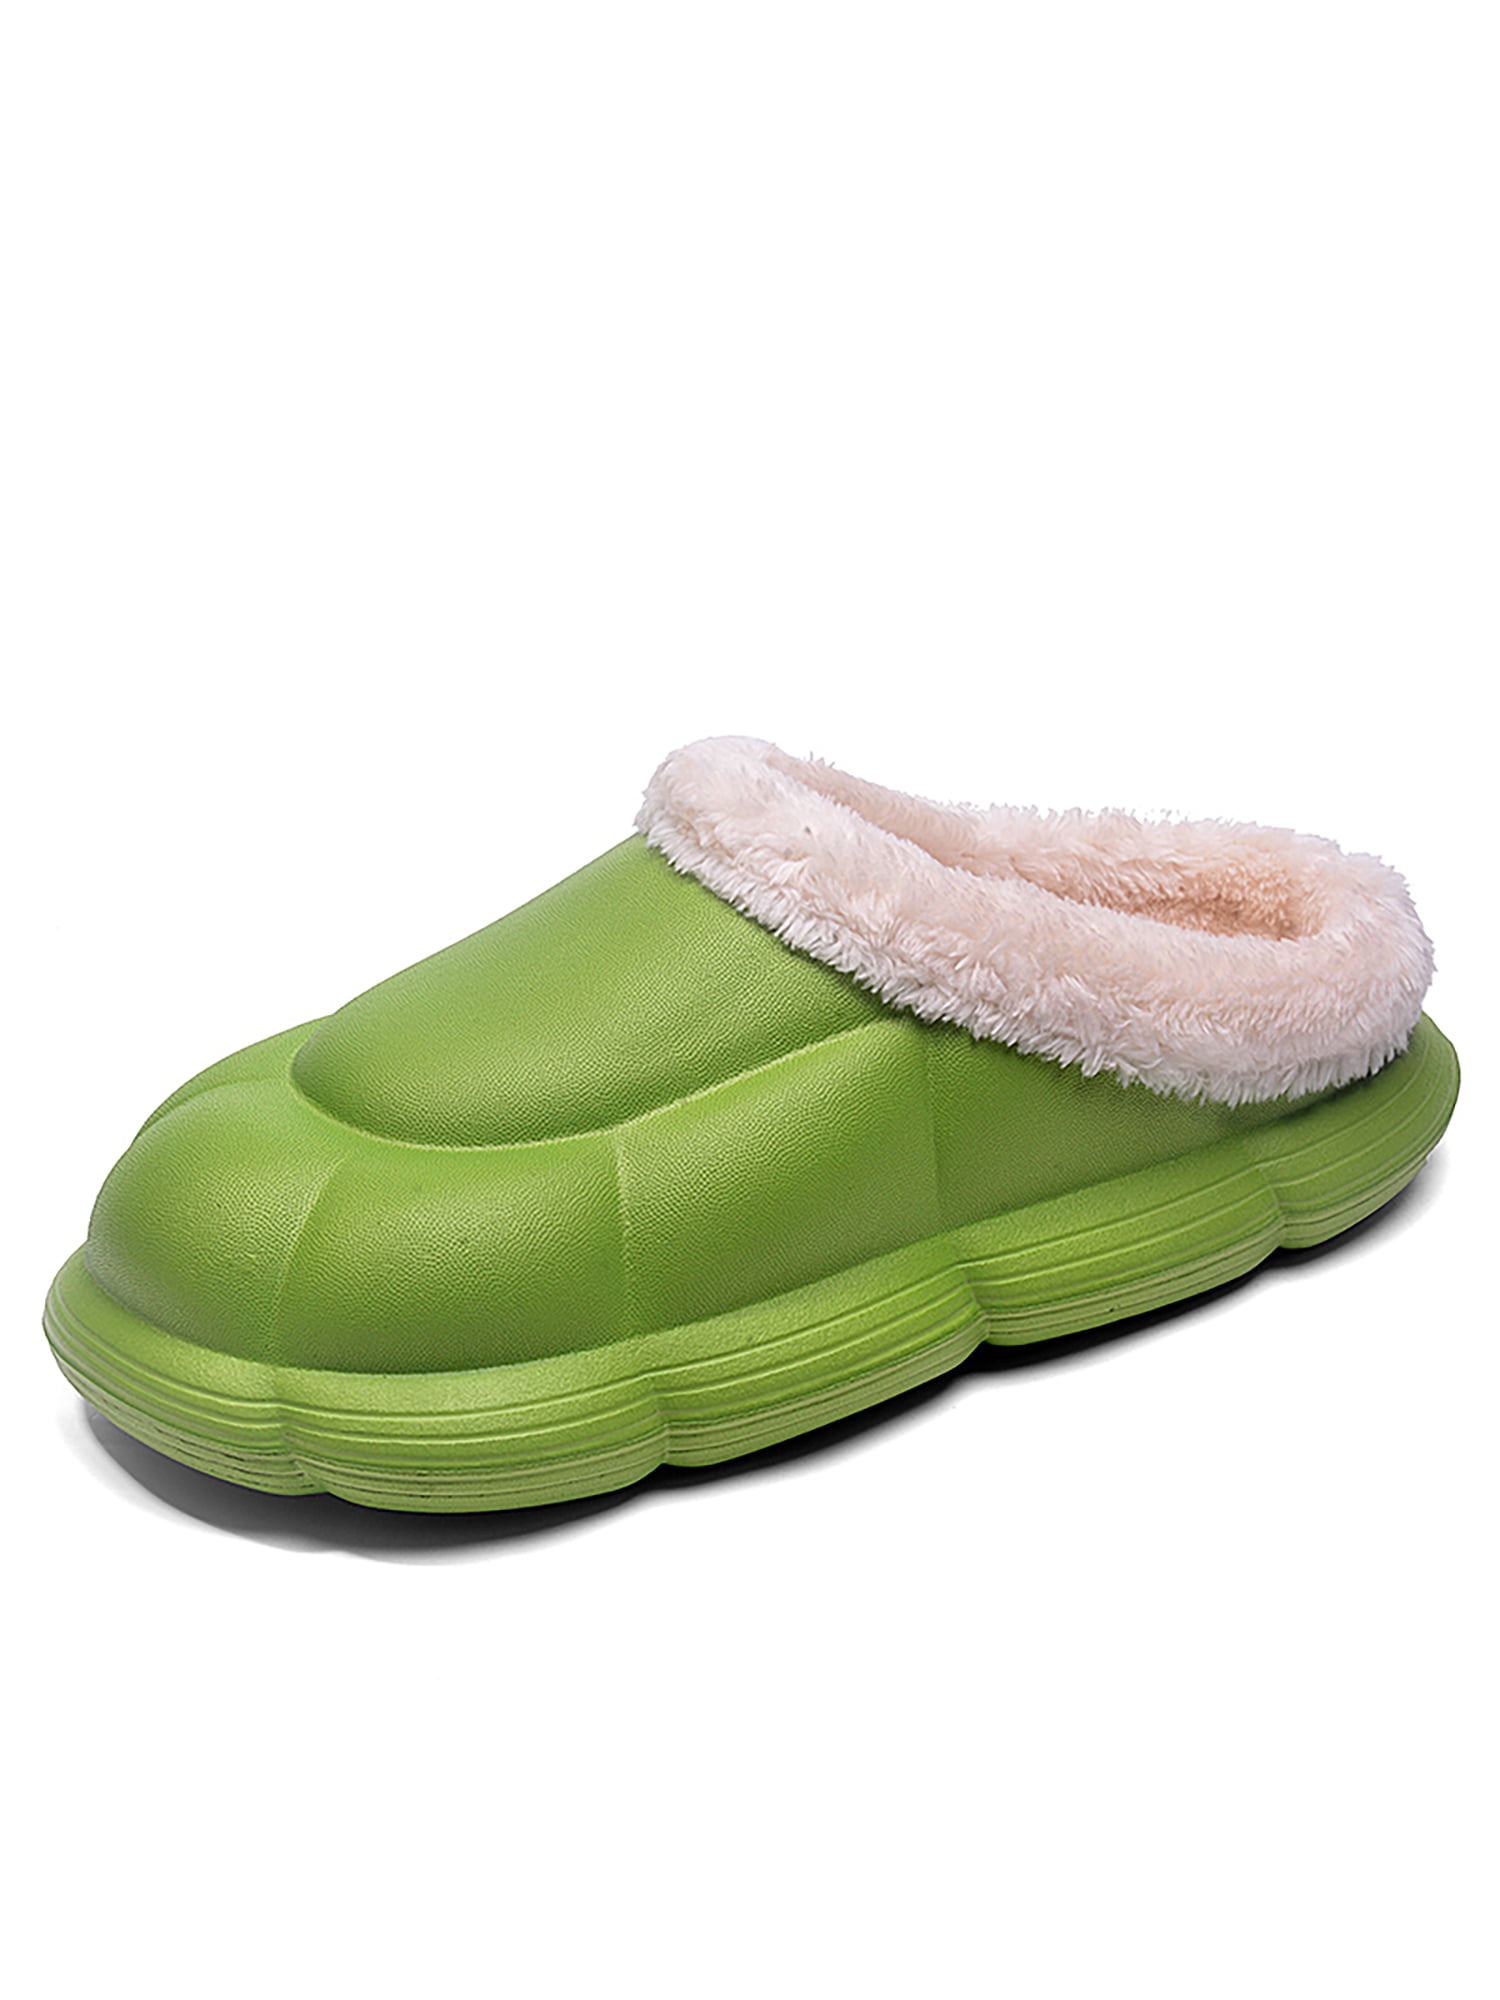 Winter Soft Women Men Warm Clog Slipper Indoor Plush Lined House Shoes Xmas Gift 